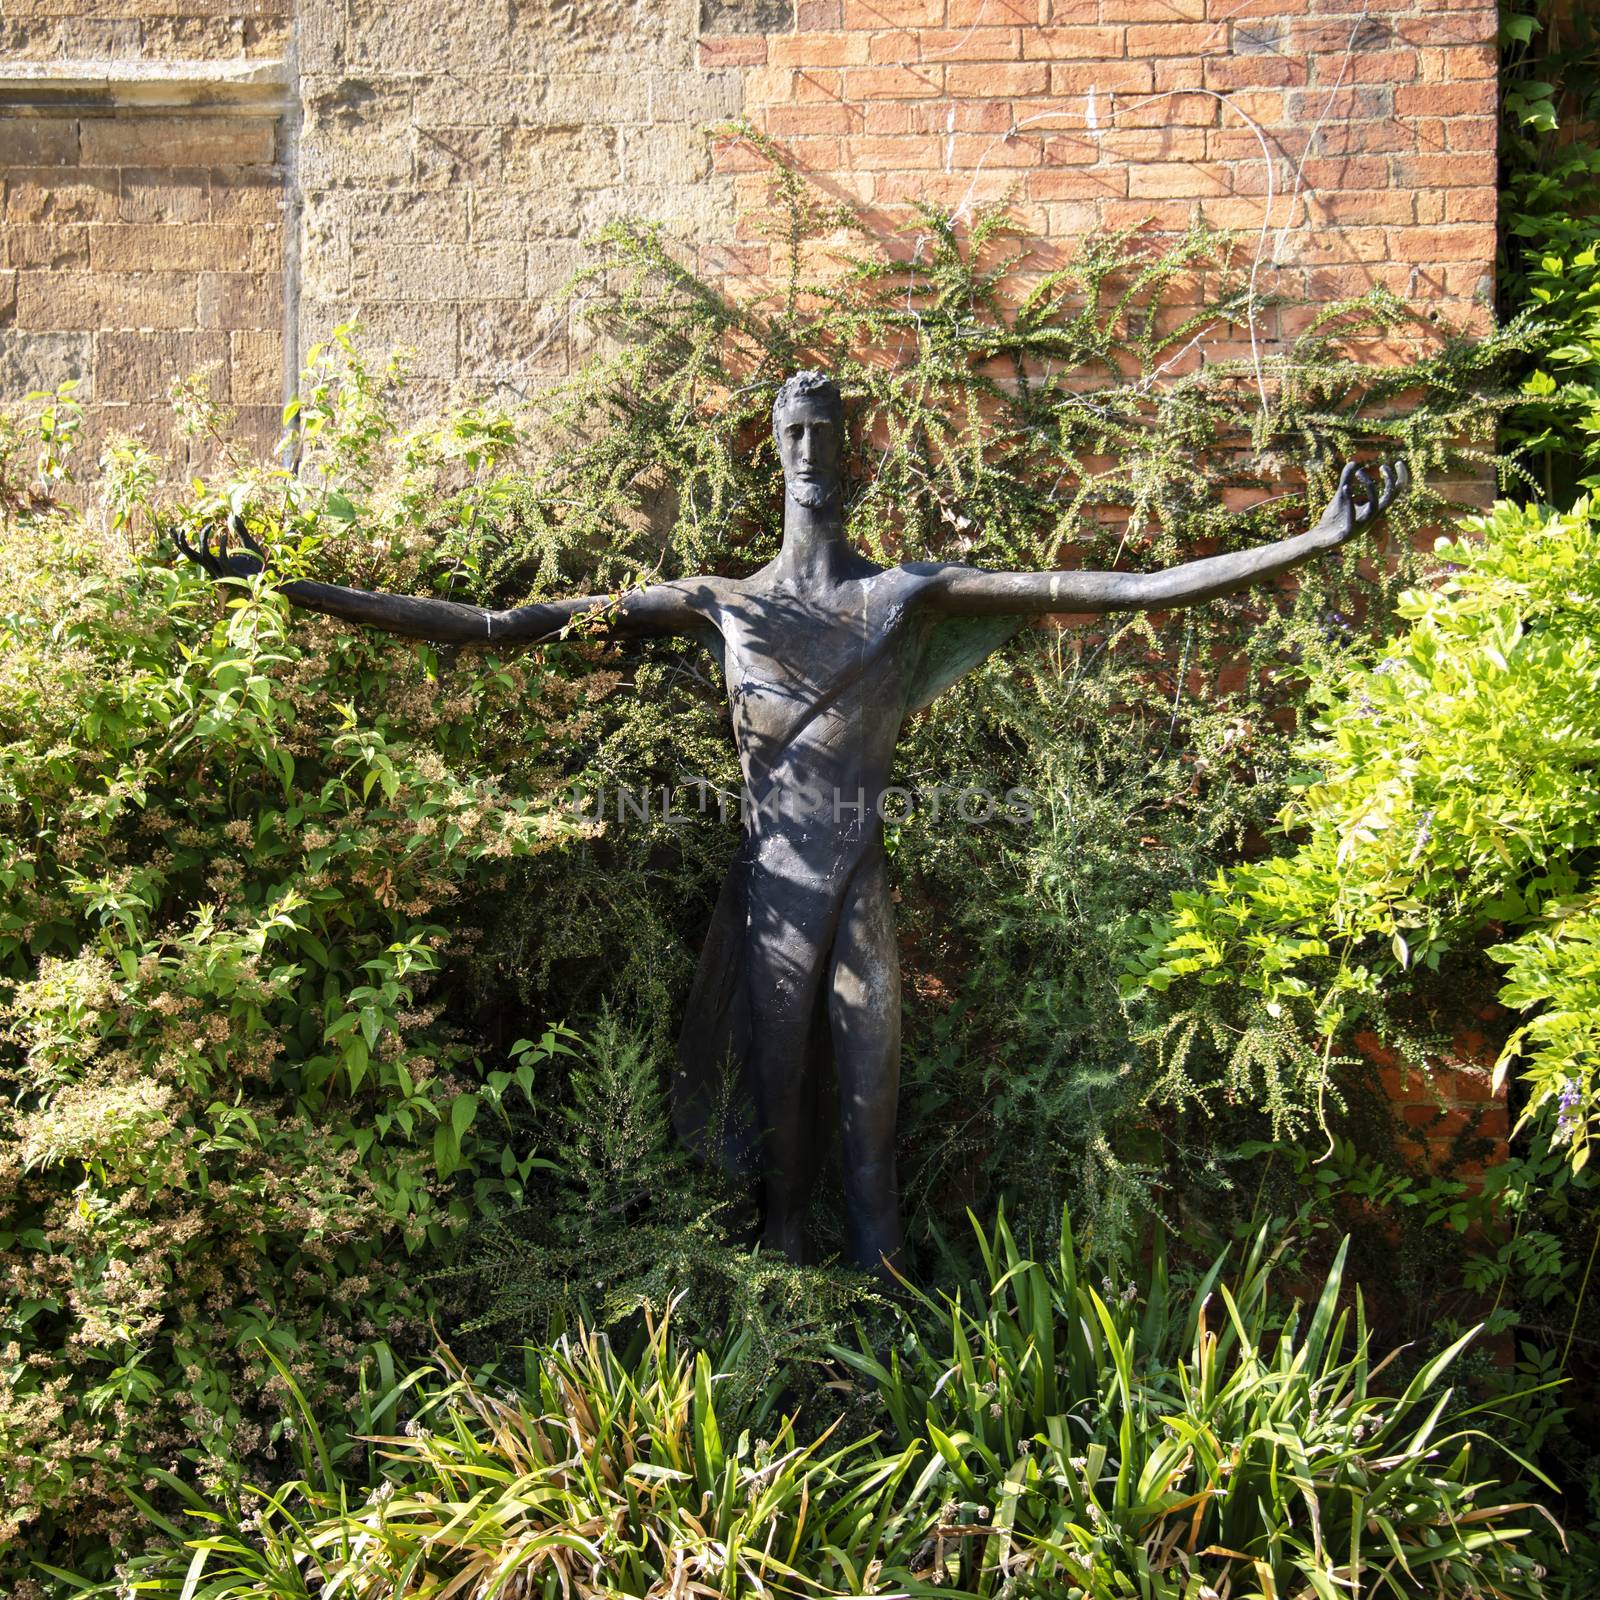 UK, Launde Abbey, Leicestershire - July 2018: Modern Statue of Christ in the abbey garden	